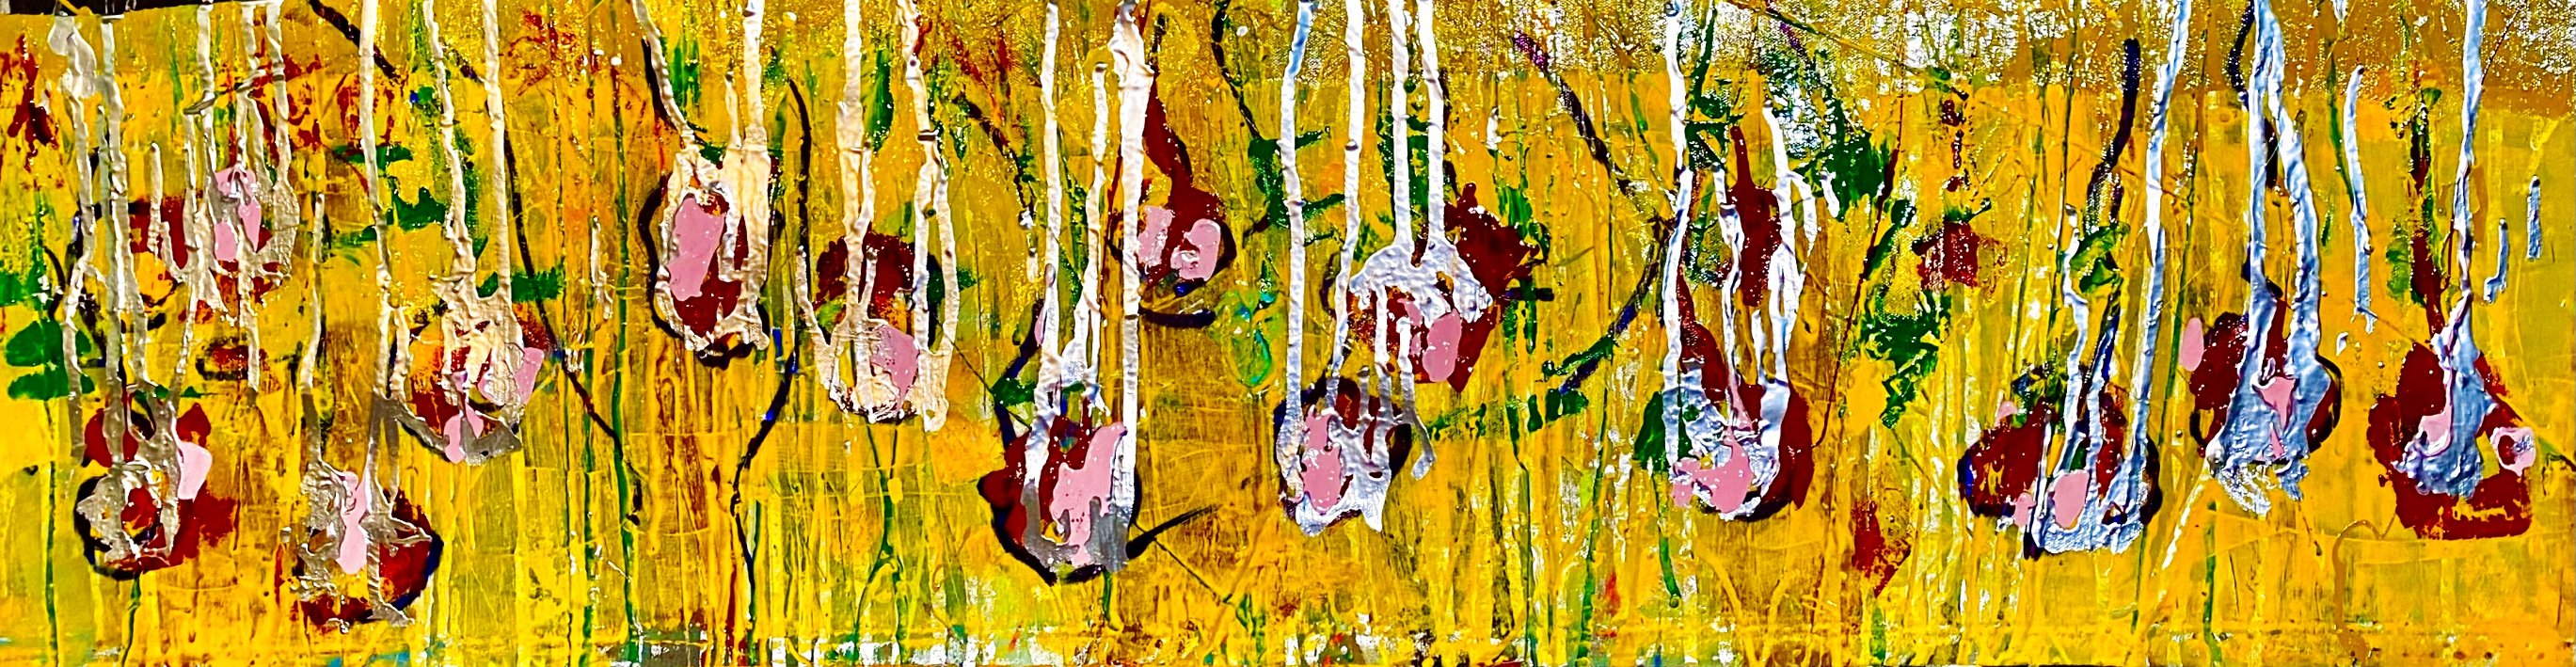 Birth of Life 2022 12x44 - Huge Original Painting by Giora Angres